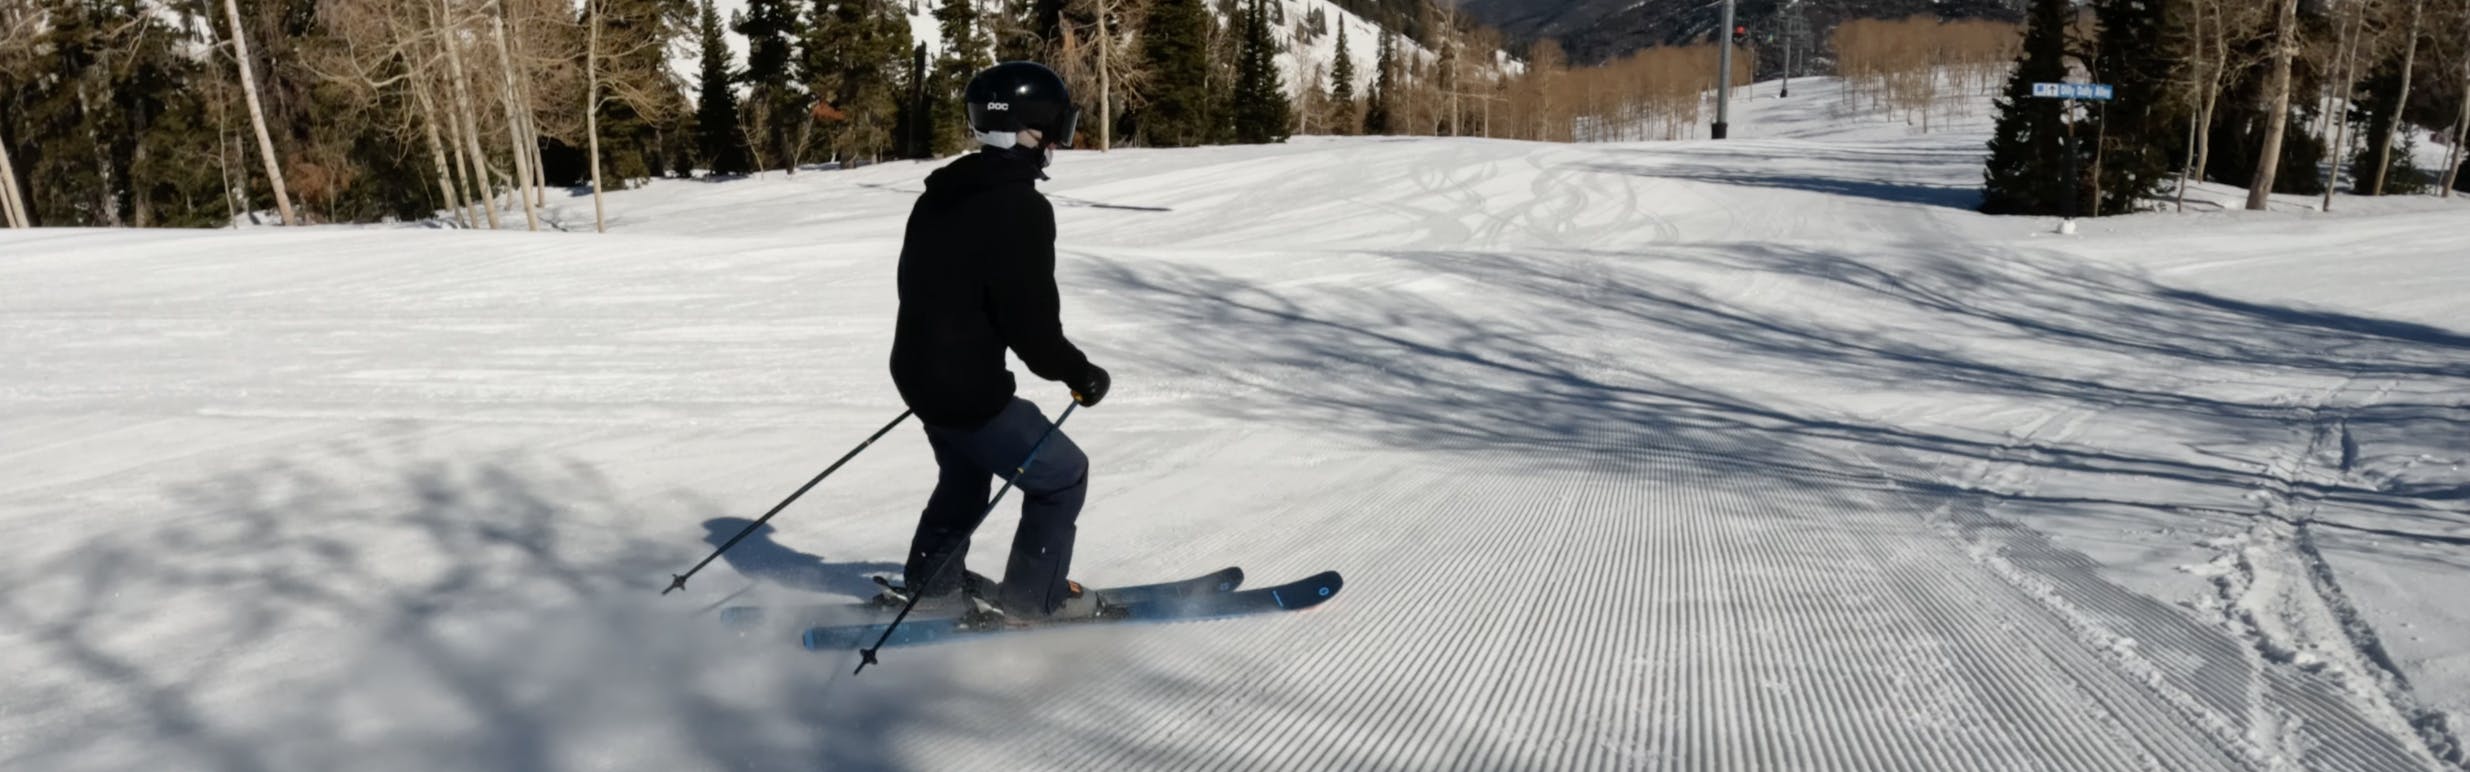 A skier on the 2023 Blizzard Black Pearl 88 Skis.